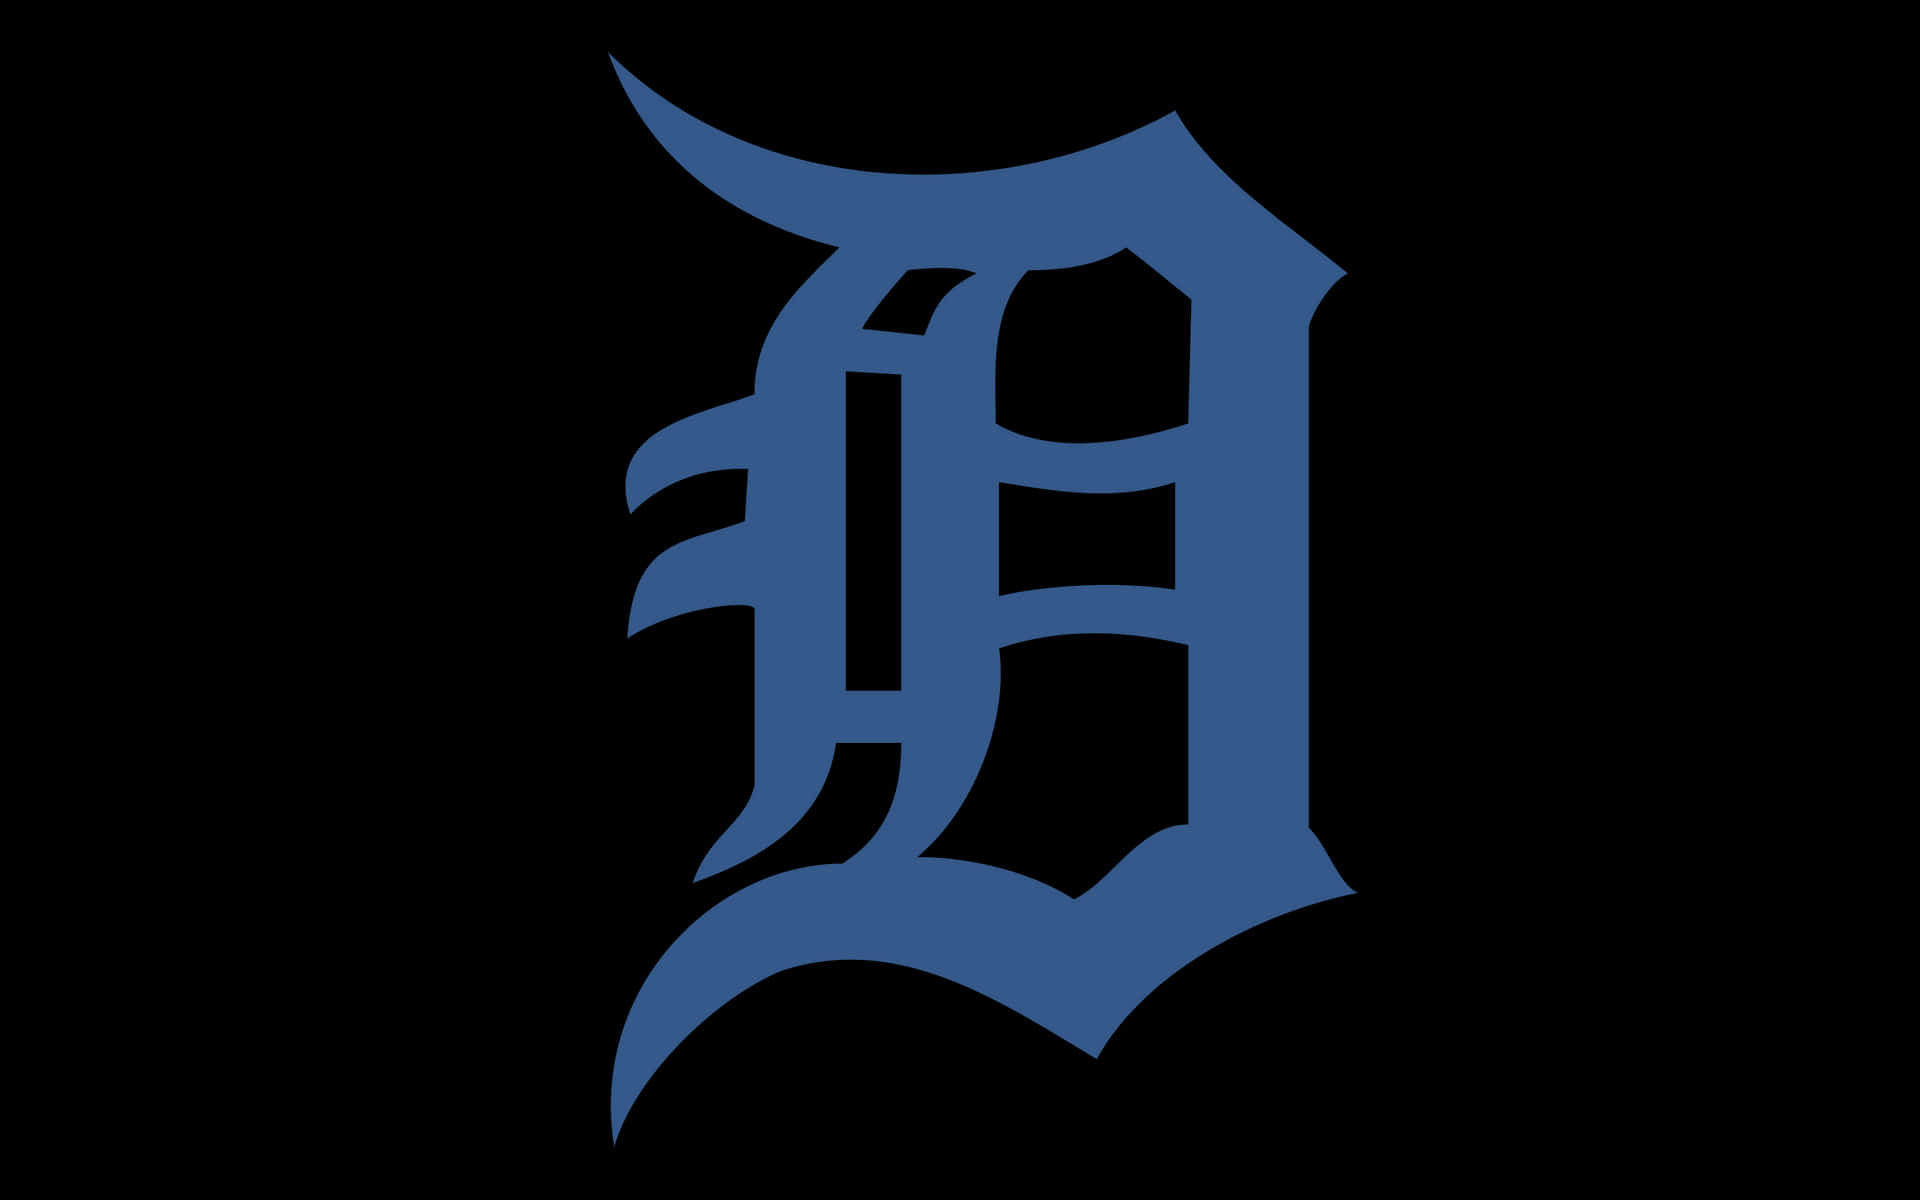 Detroit Tigers sign Keston Hiura Detroit Tigers Acquire T.J. Hopkins Detroit Tigers Opening Day Starting Lineup Andre Lipcius Detroit Tigers Cut Detroit Tigers OF Riley Greene Detroit Tigers P Tyler Mattison Detroit Tigers Pitching Rotation